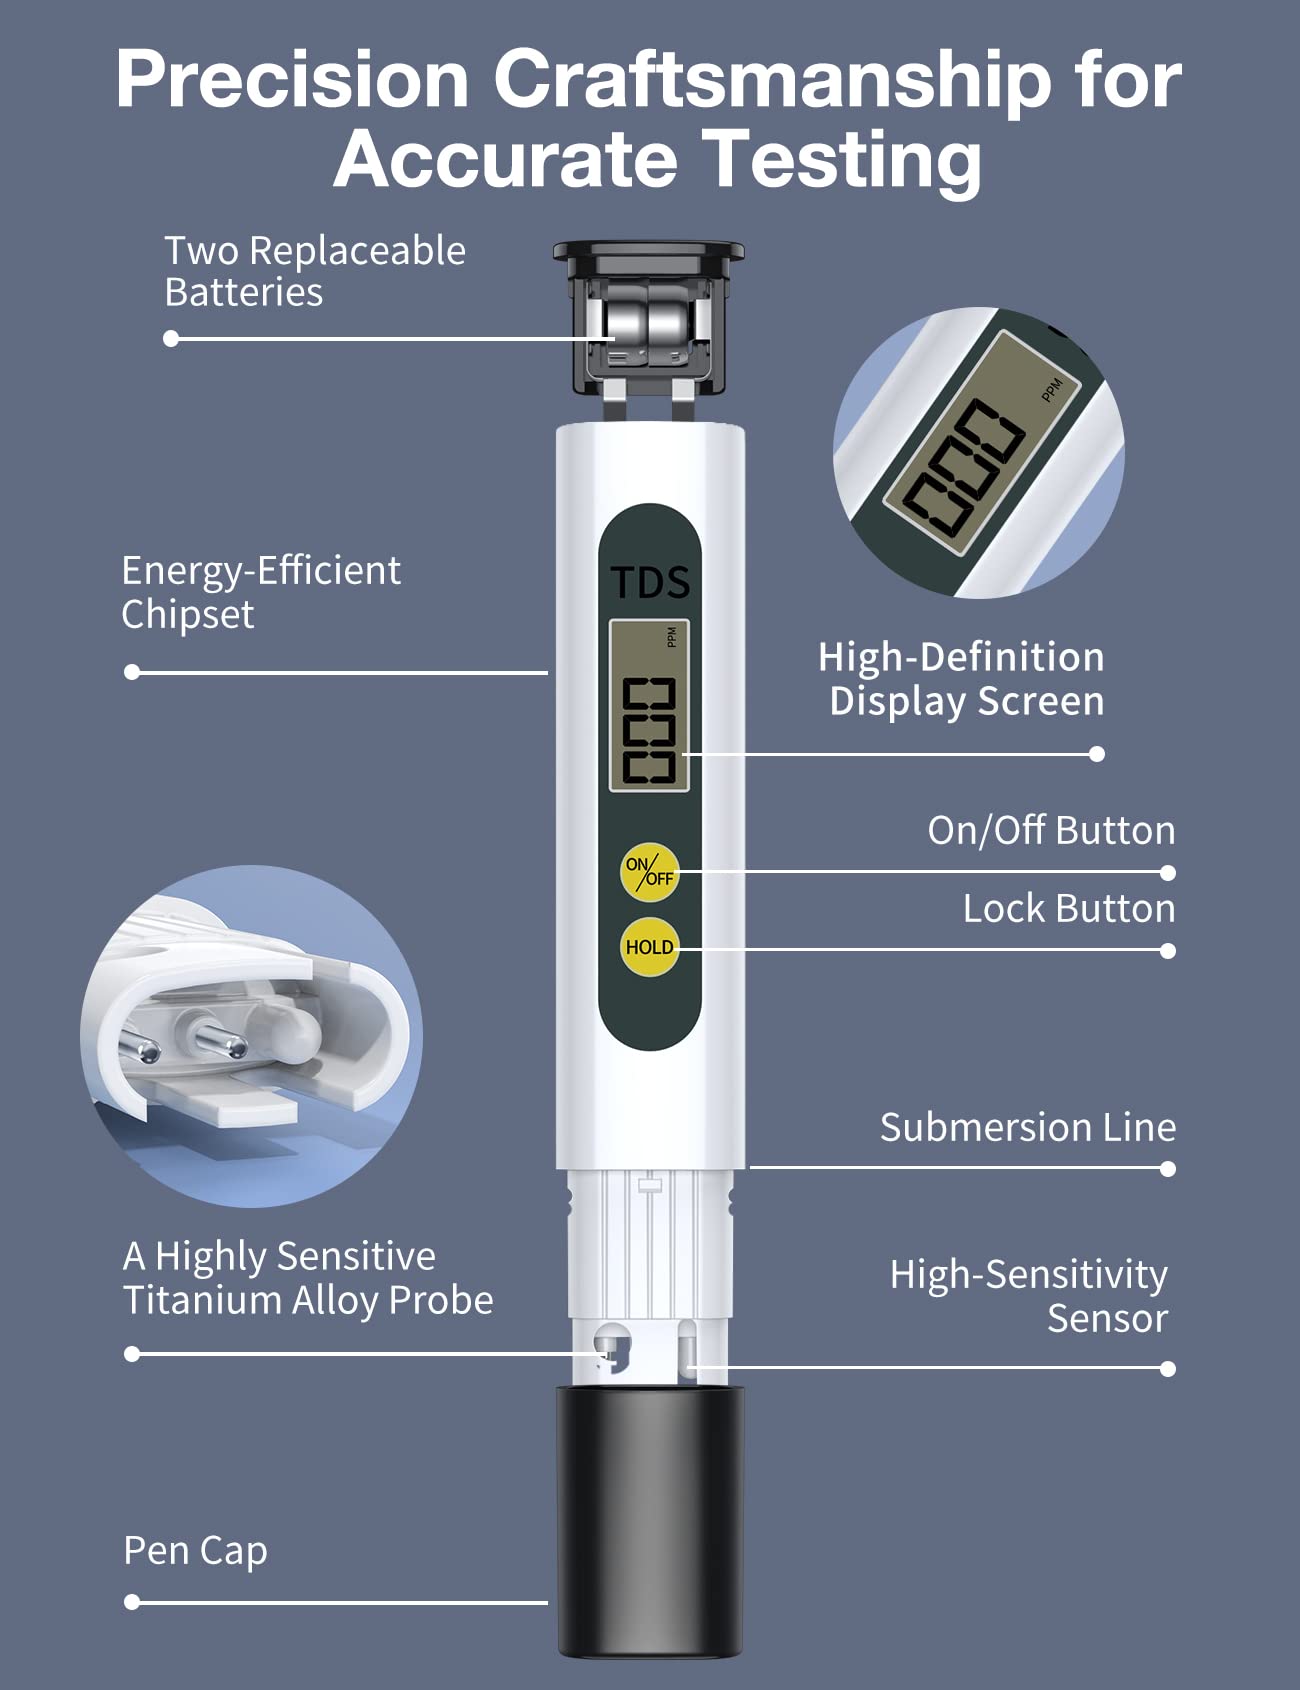 Tds Meter Digital Water Tester - Affordable & Reliable Water Testing Kits for Drinking Water - 0-9990ppm - 1s Get Accurate Reasult for Home, Well, Tap Water Quality Test and More!